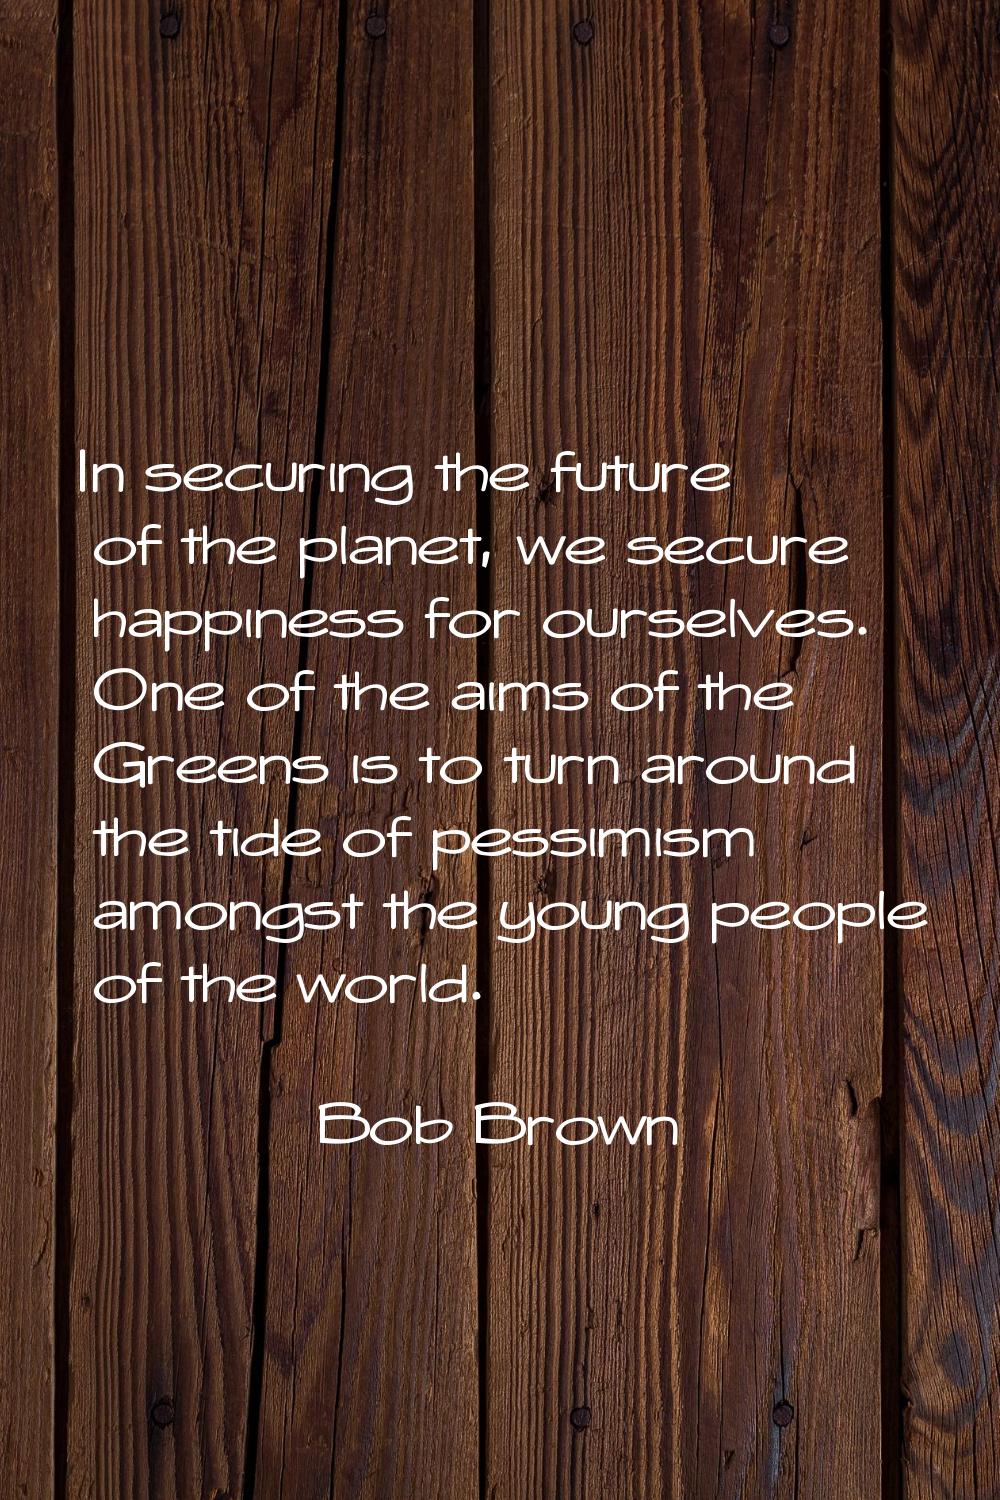 In securing the future of the planet, we secure happiness for ourselves. One of the aims of the Gre